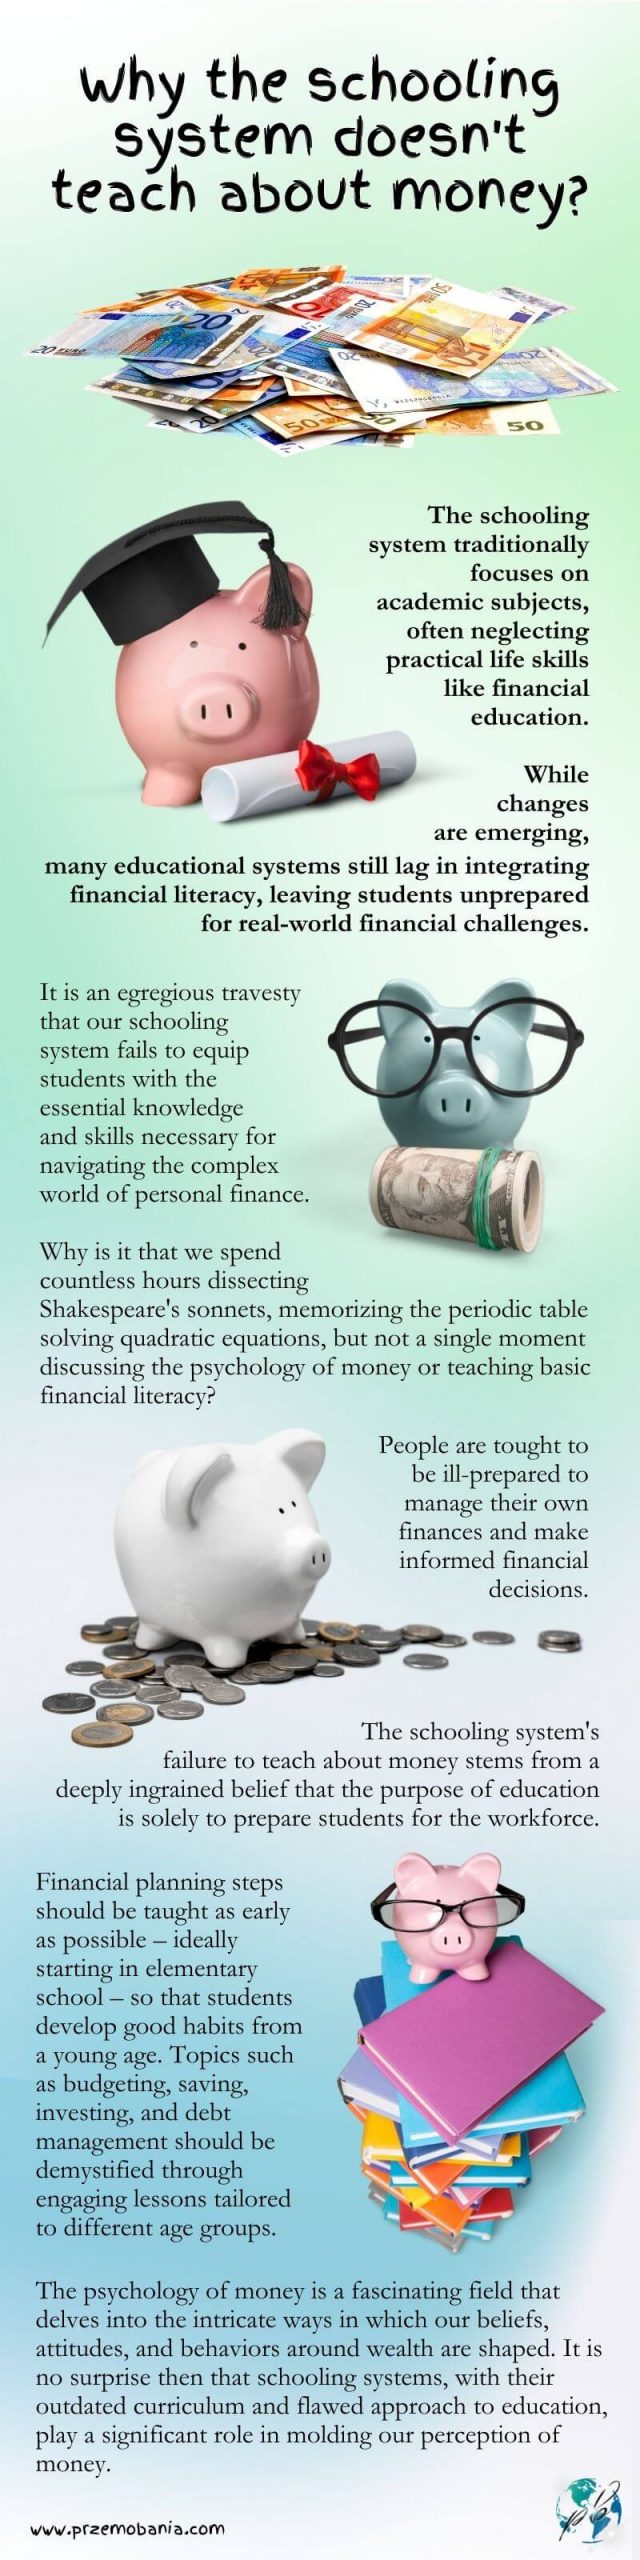 Why schooling system doesn't teach about money infographic